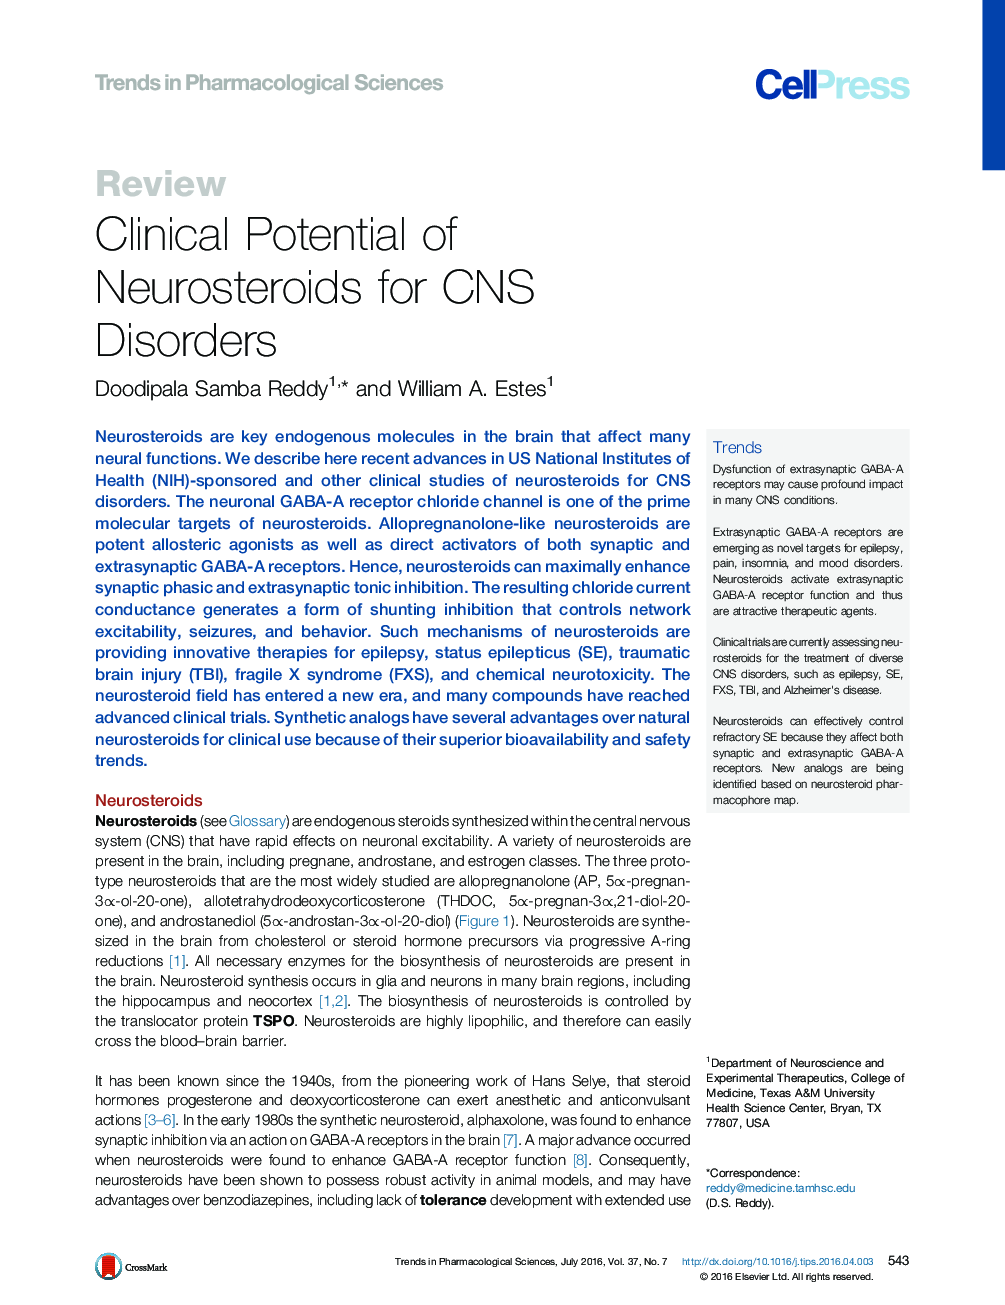 Clinical Potential of Neurosteroids for CNS Disorders